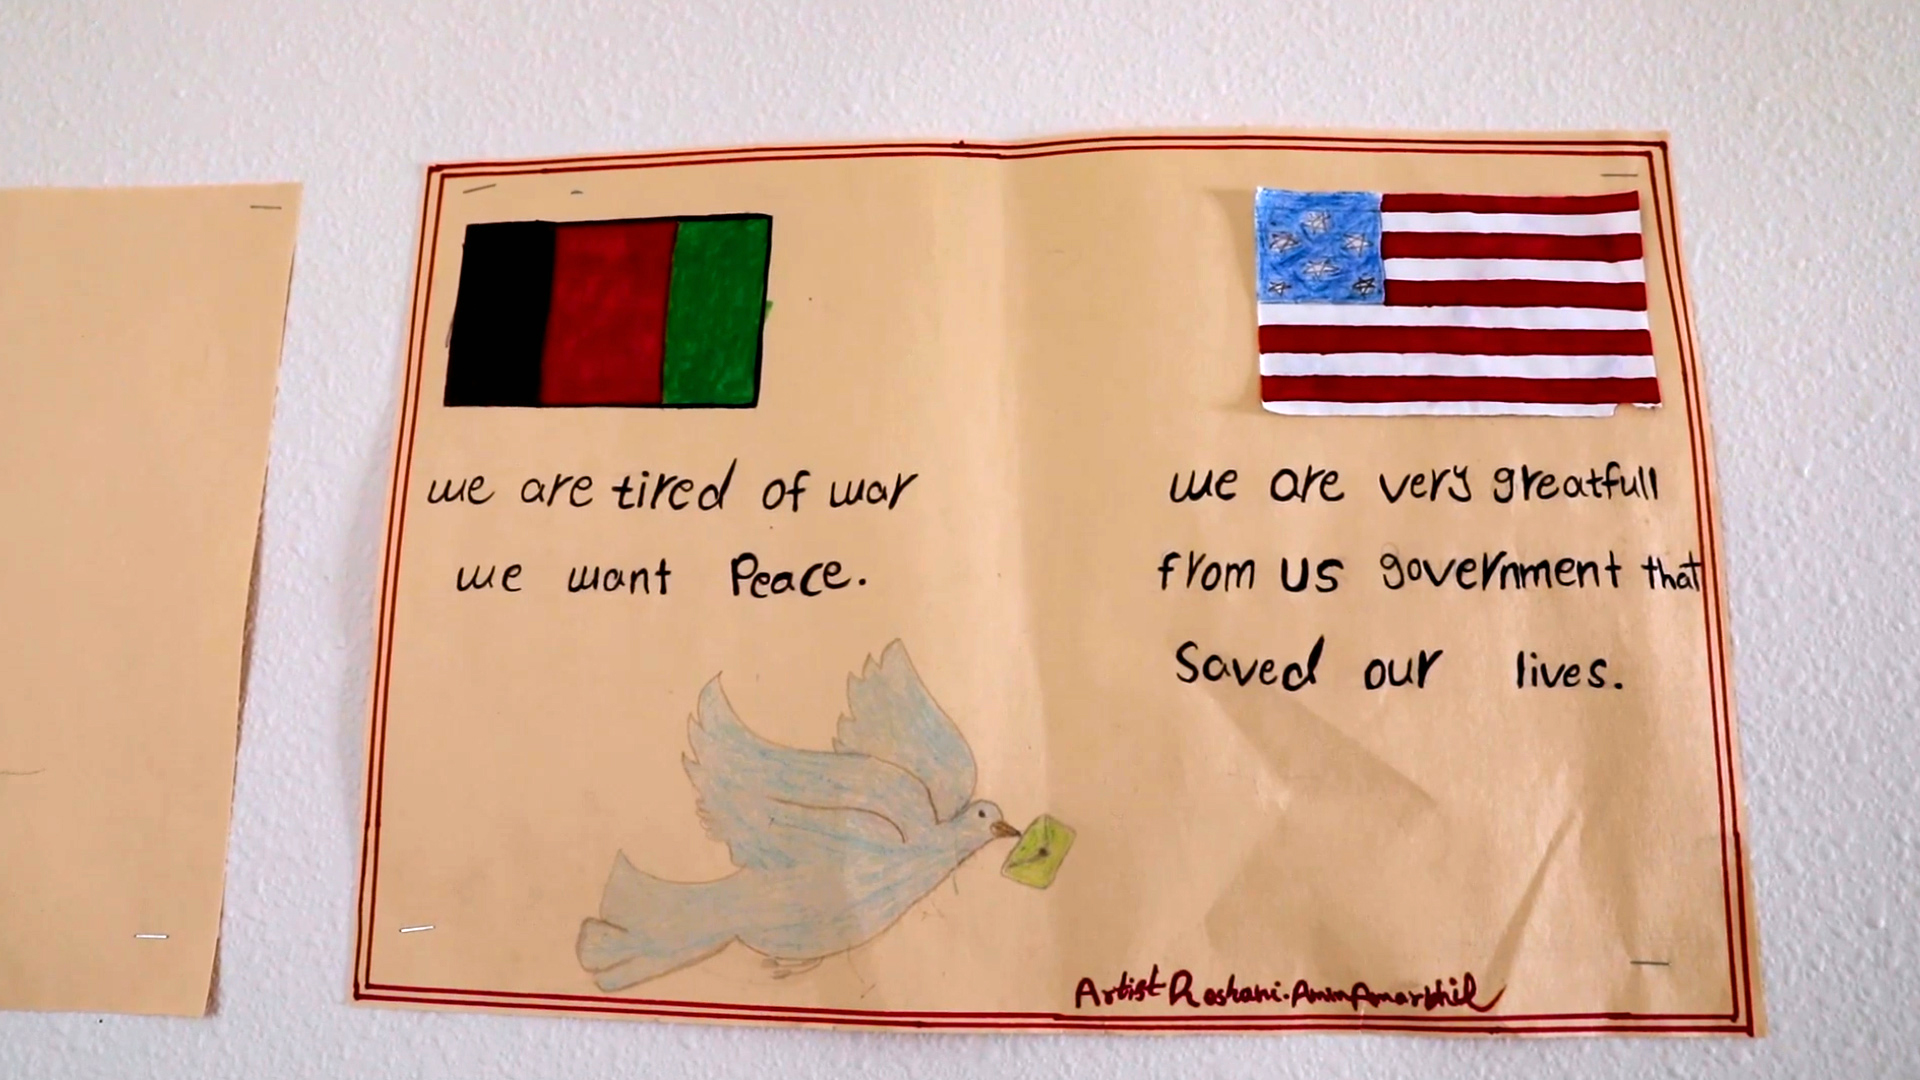 A hand-drawn poster shows an Afghan flag with the legend "we are tired of war, we want peace" and an American flag with the legend "we are very greatfull from US government that saved our lives."